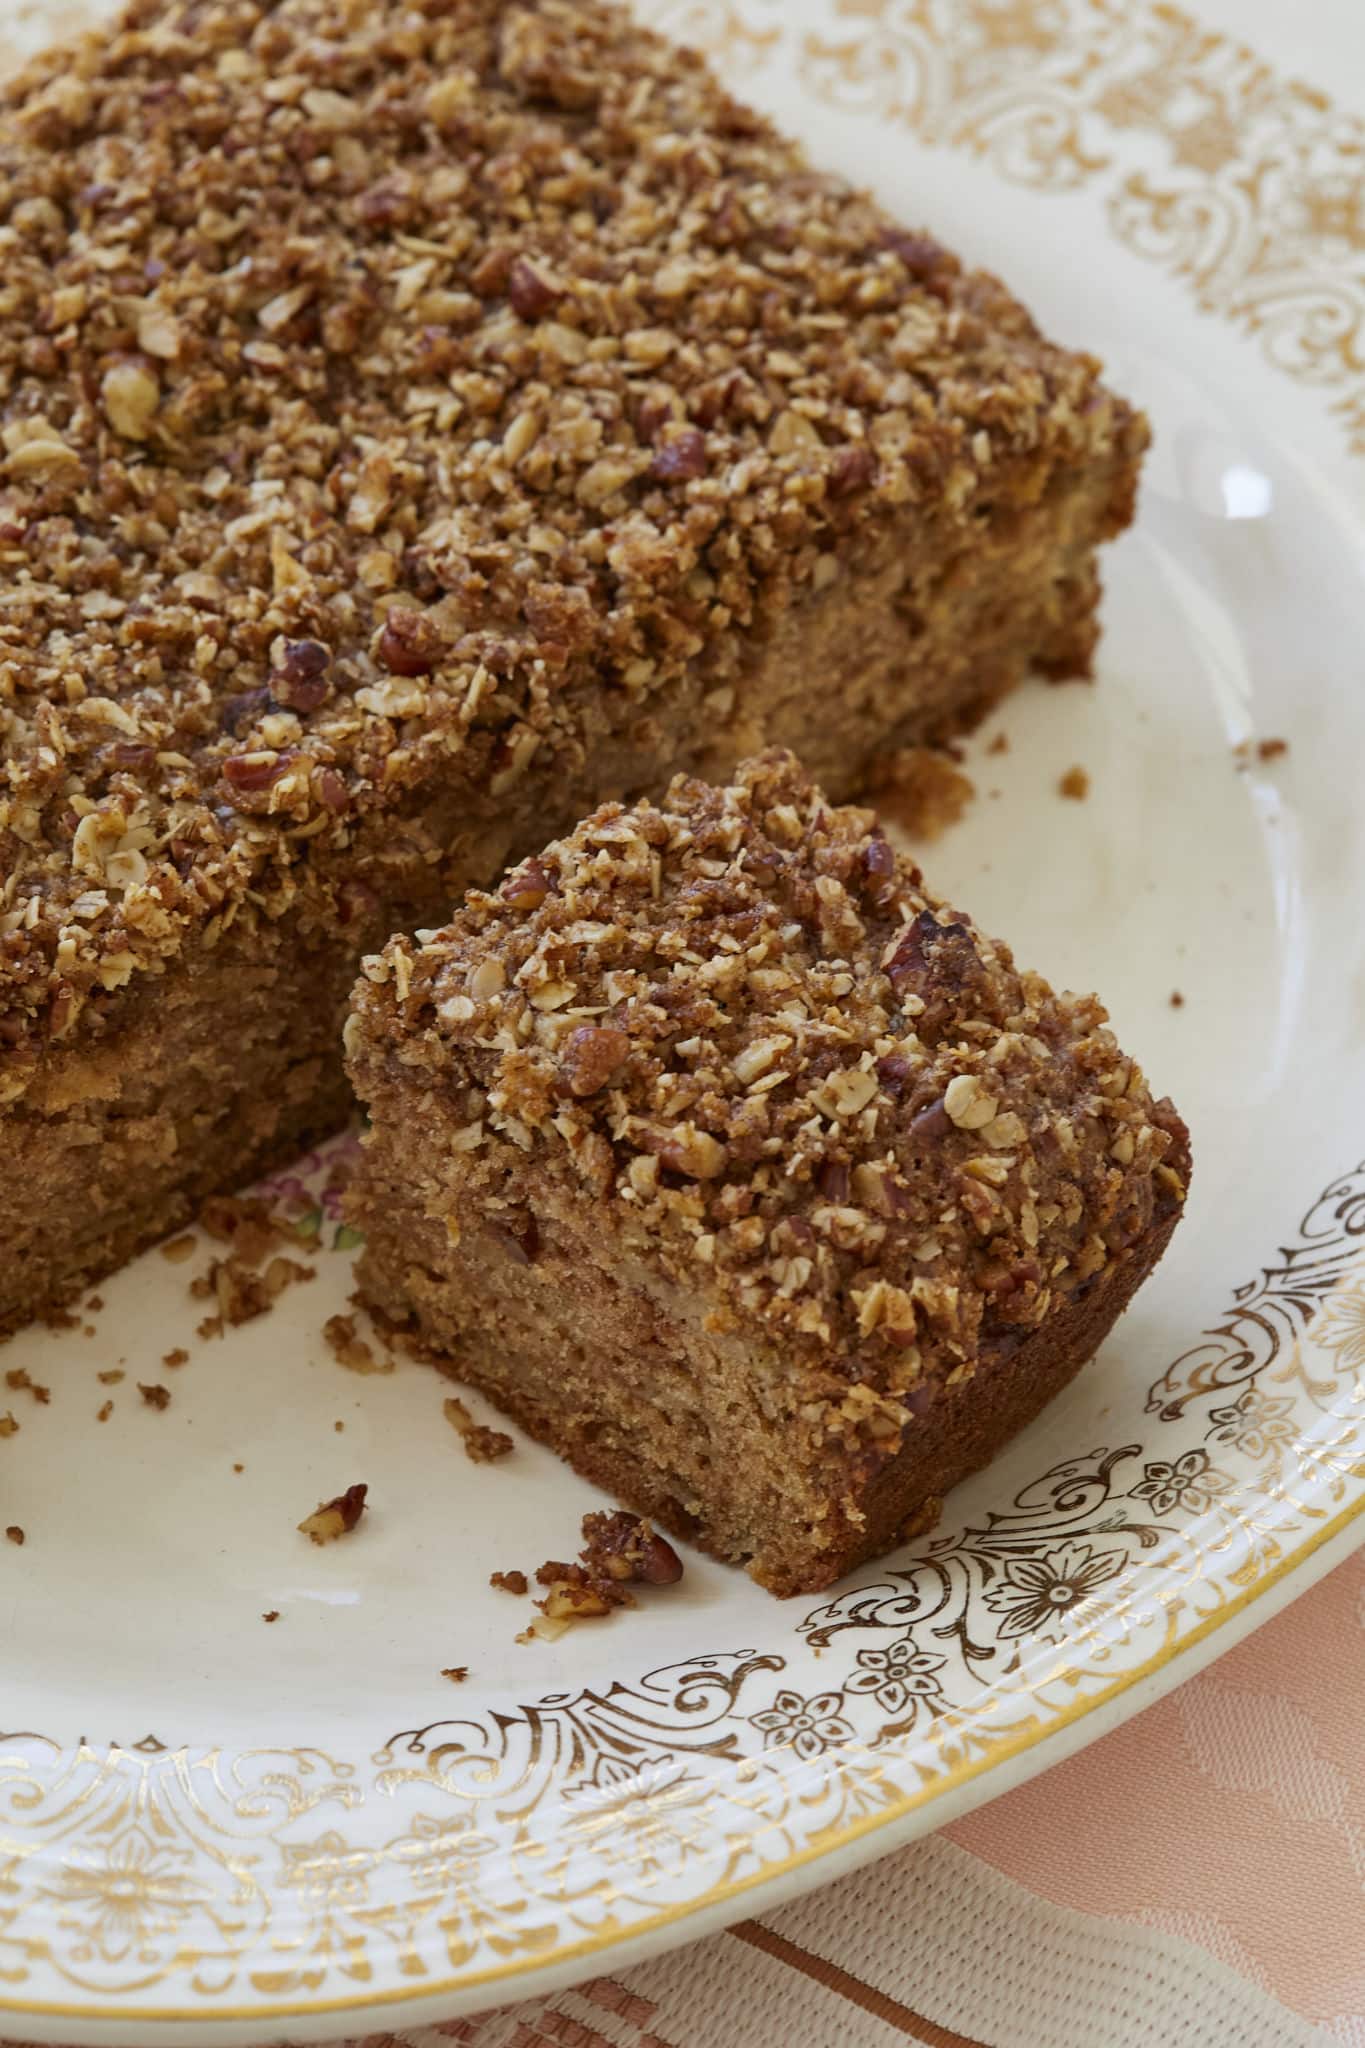 An apple snack cake is served on a dish. The streusel topping contains walnuts.